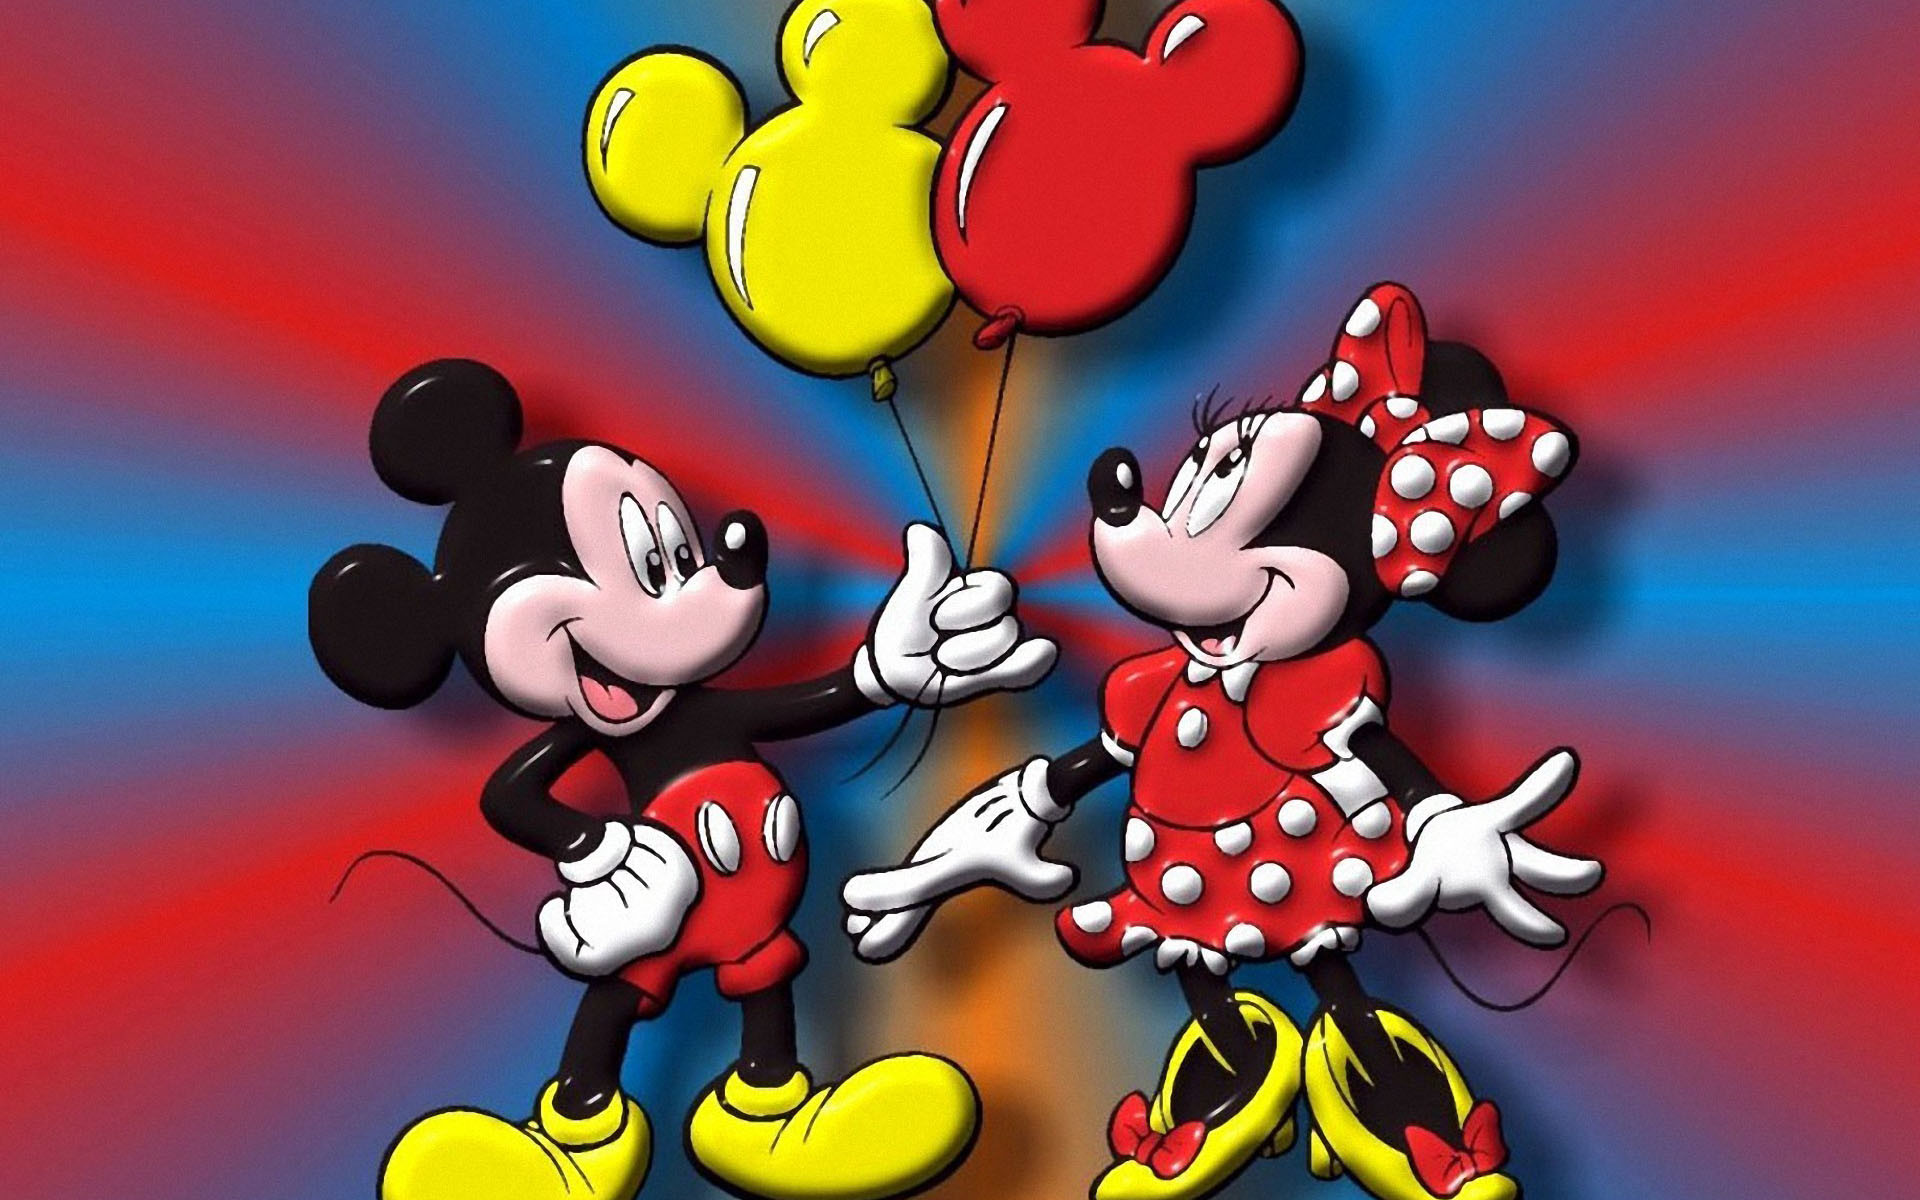 Mickey And Minnie Backgrounds 1920 1200 Hd Background Wallpapers Free Amazing Cool Tablet 4k High Definition 1920 1200 Wallpaper Hd 1920x1200